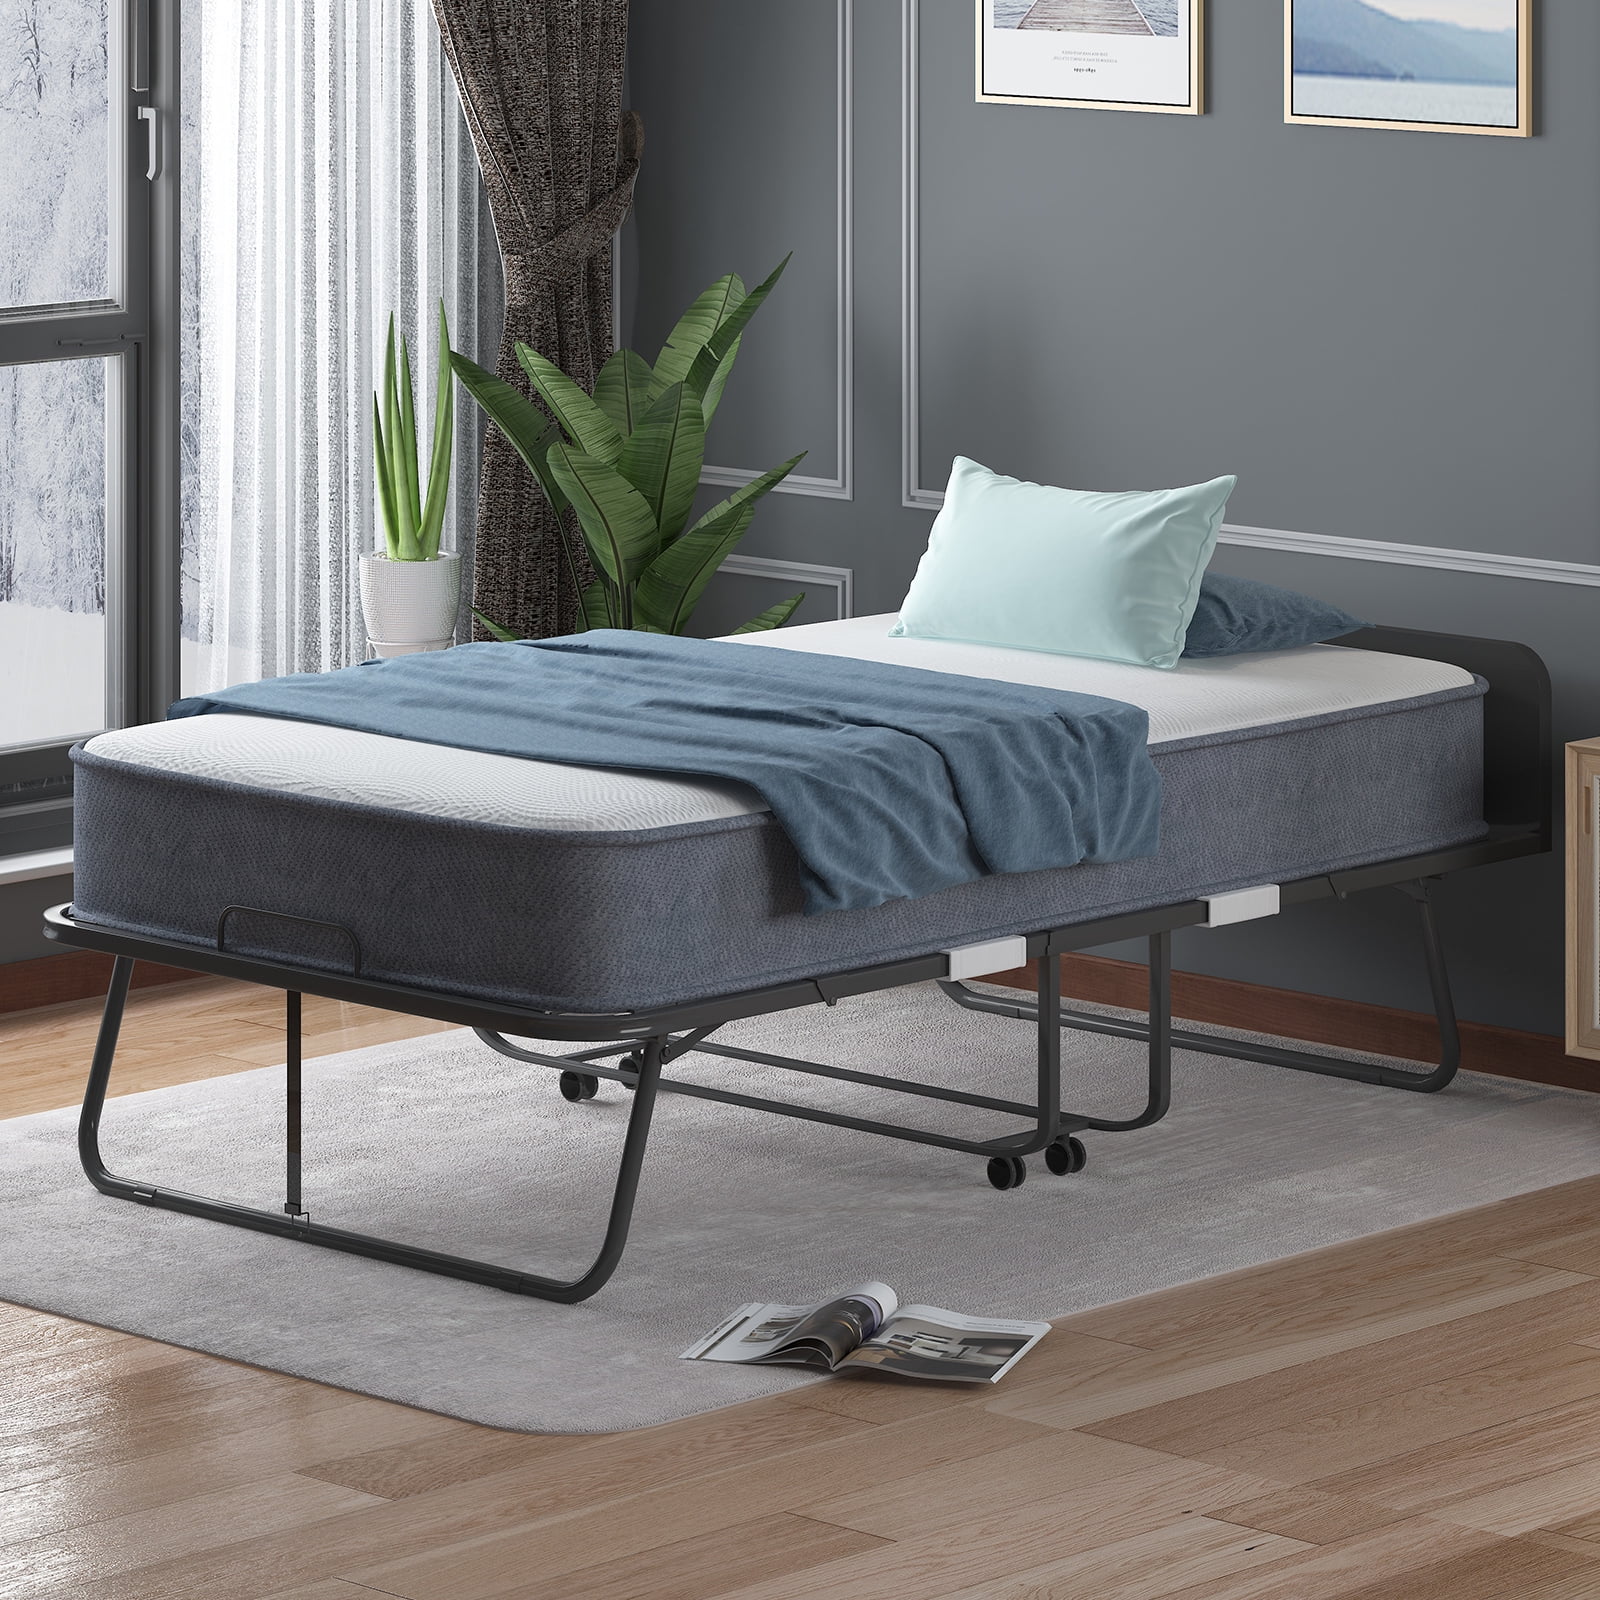 Alwyn Home Folding Bed with Memory Foam Mattress - 75 x 38 Twin Size Bed  Frame - Portable and Foldable - Strong Back Support & Reviews